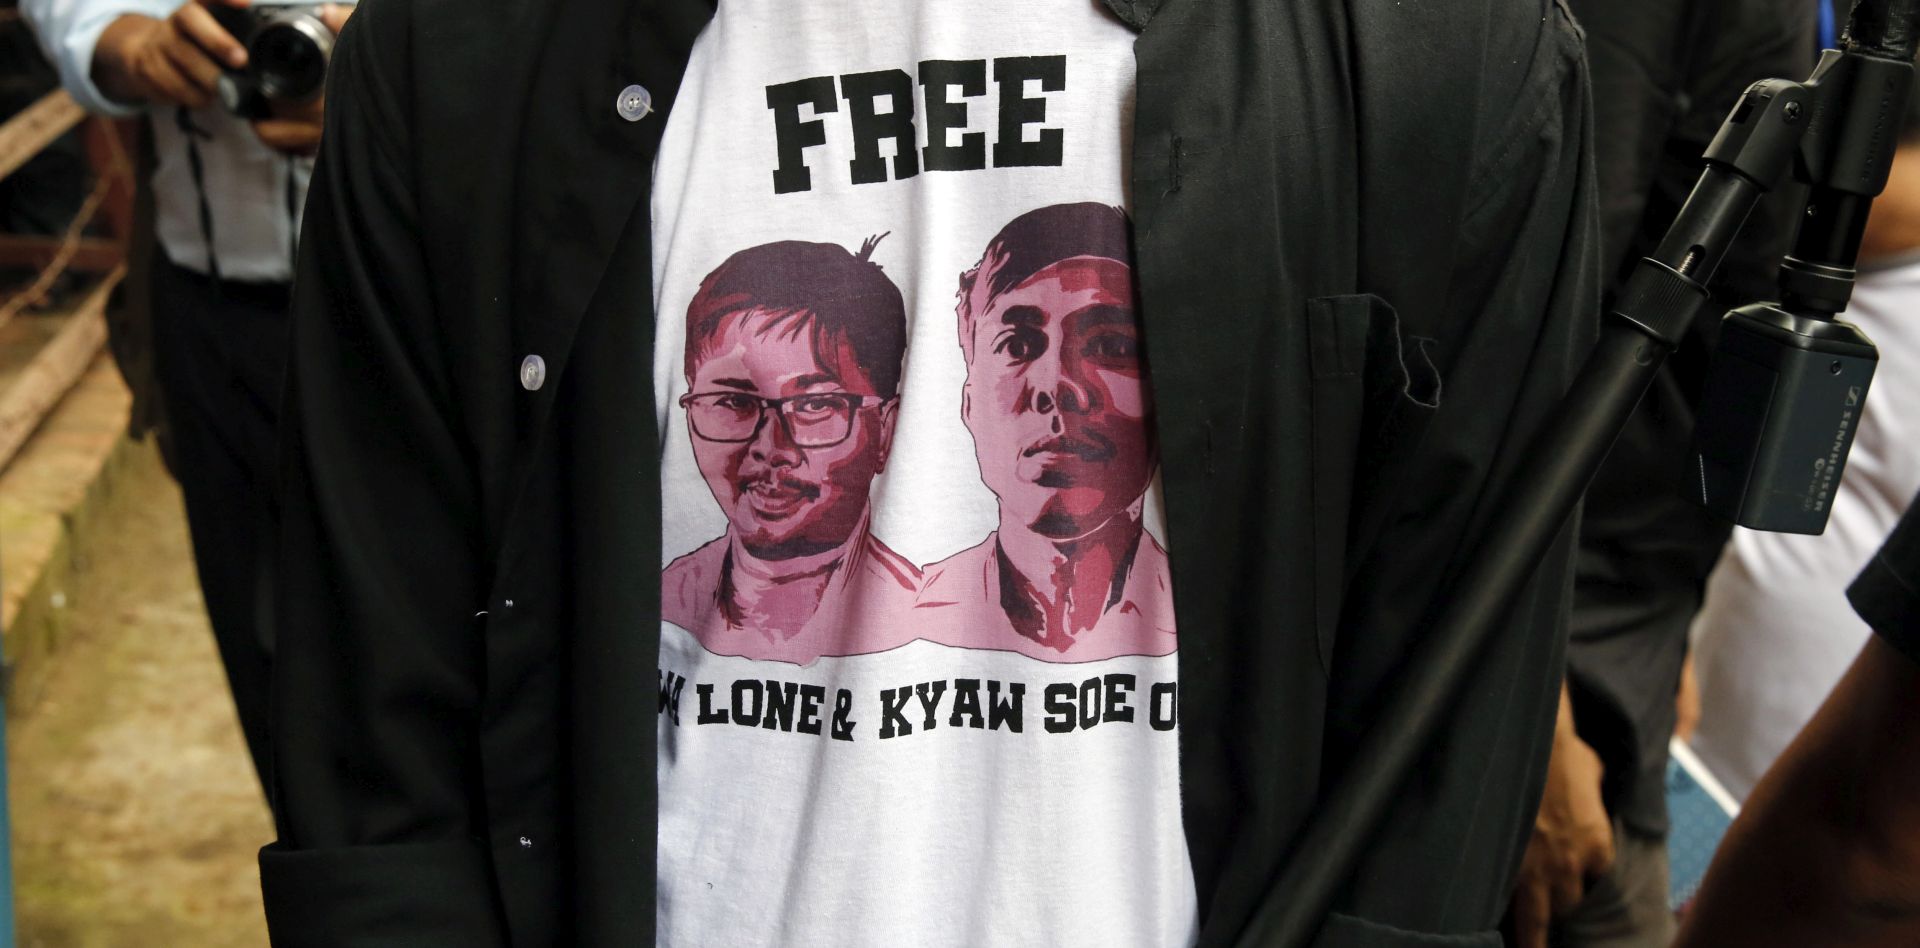 epa06993695 A journalists wearing a shirt with the image of Reuters journalists Wa Lone and Kyaw Soe Oo stands outside Insein township court to hear the journalist's verdict in Yangon, Myanmar, 03 September 2018. The Myanmar court on 27 August 2018 postponed the verdict in the trial of Reuters journalist Wa Lone and Kyaw Soe Oo to 03 September 2018. Reuters journalists Wa Lone and Kyaw Soe Oo were arrested in the outskirts of Yangon on 12 December 2017 by Myanmar police for allegedly possessing classified police documents. Both defendants say they were framed by police.  EPA/LYNN BO BO